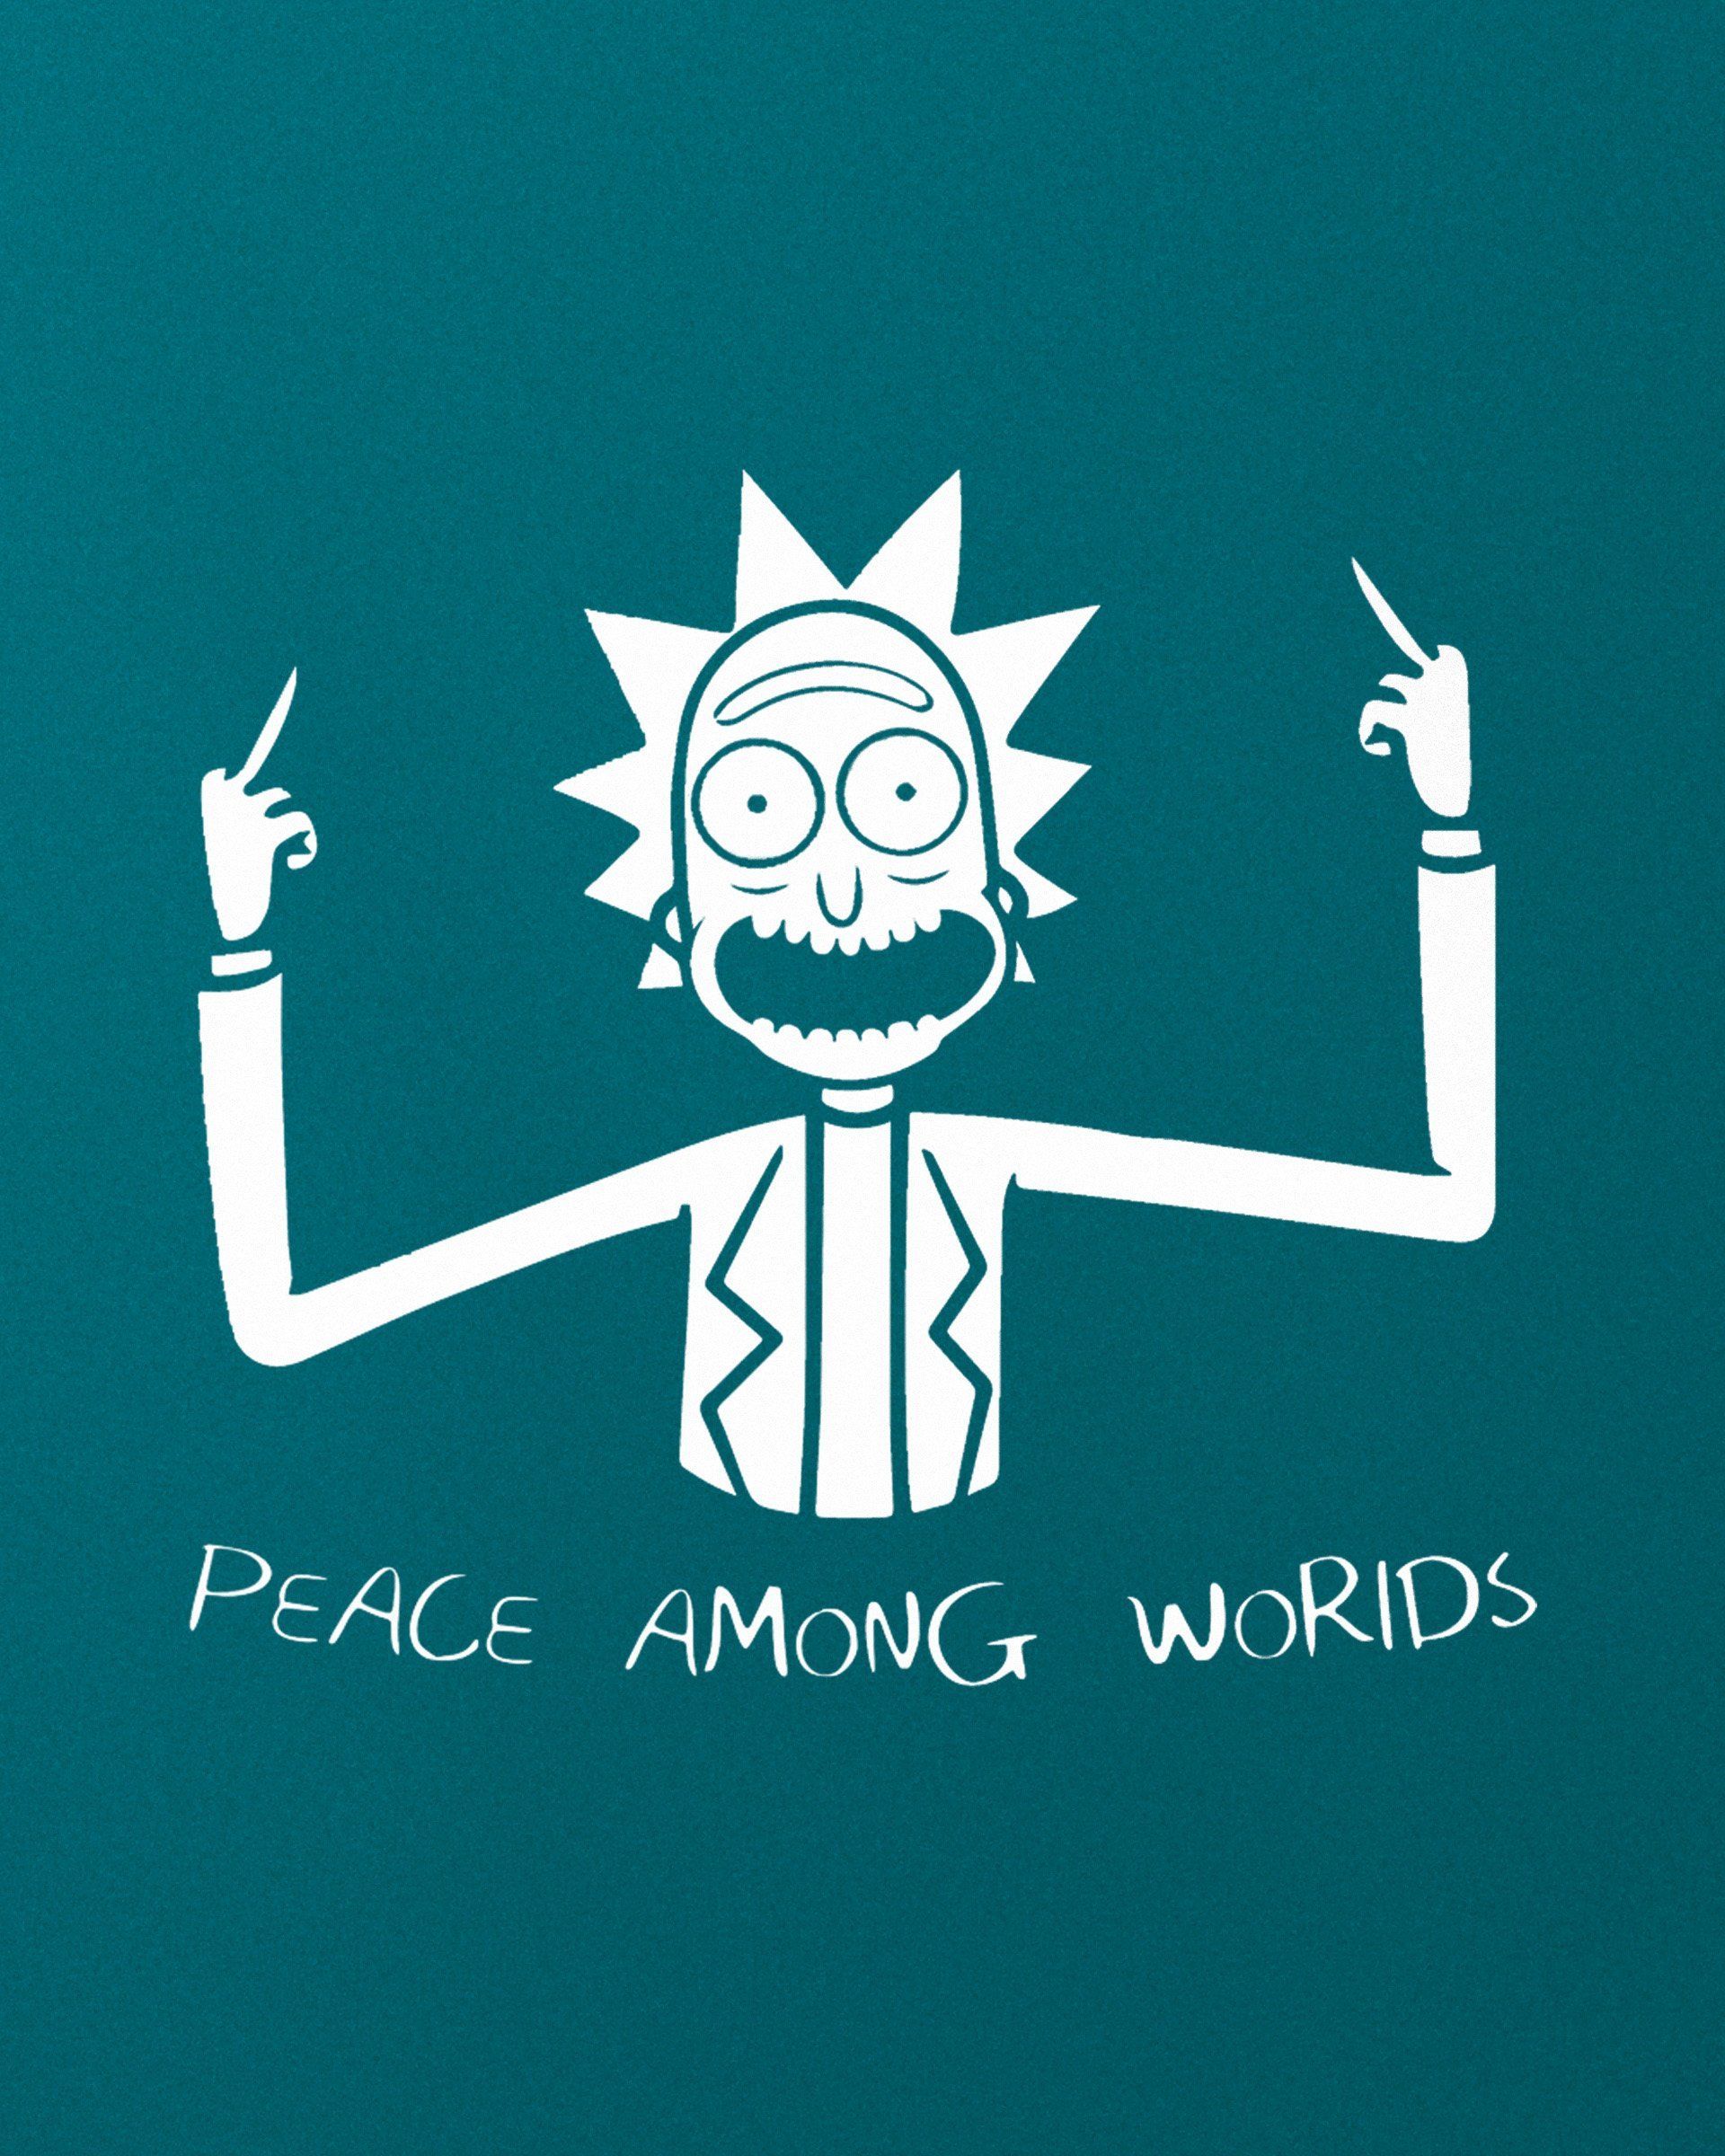 iPhone Wallpaper: iPhone Rick And Morty Wallpaper Peace Among Worlds